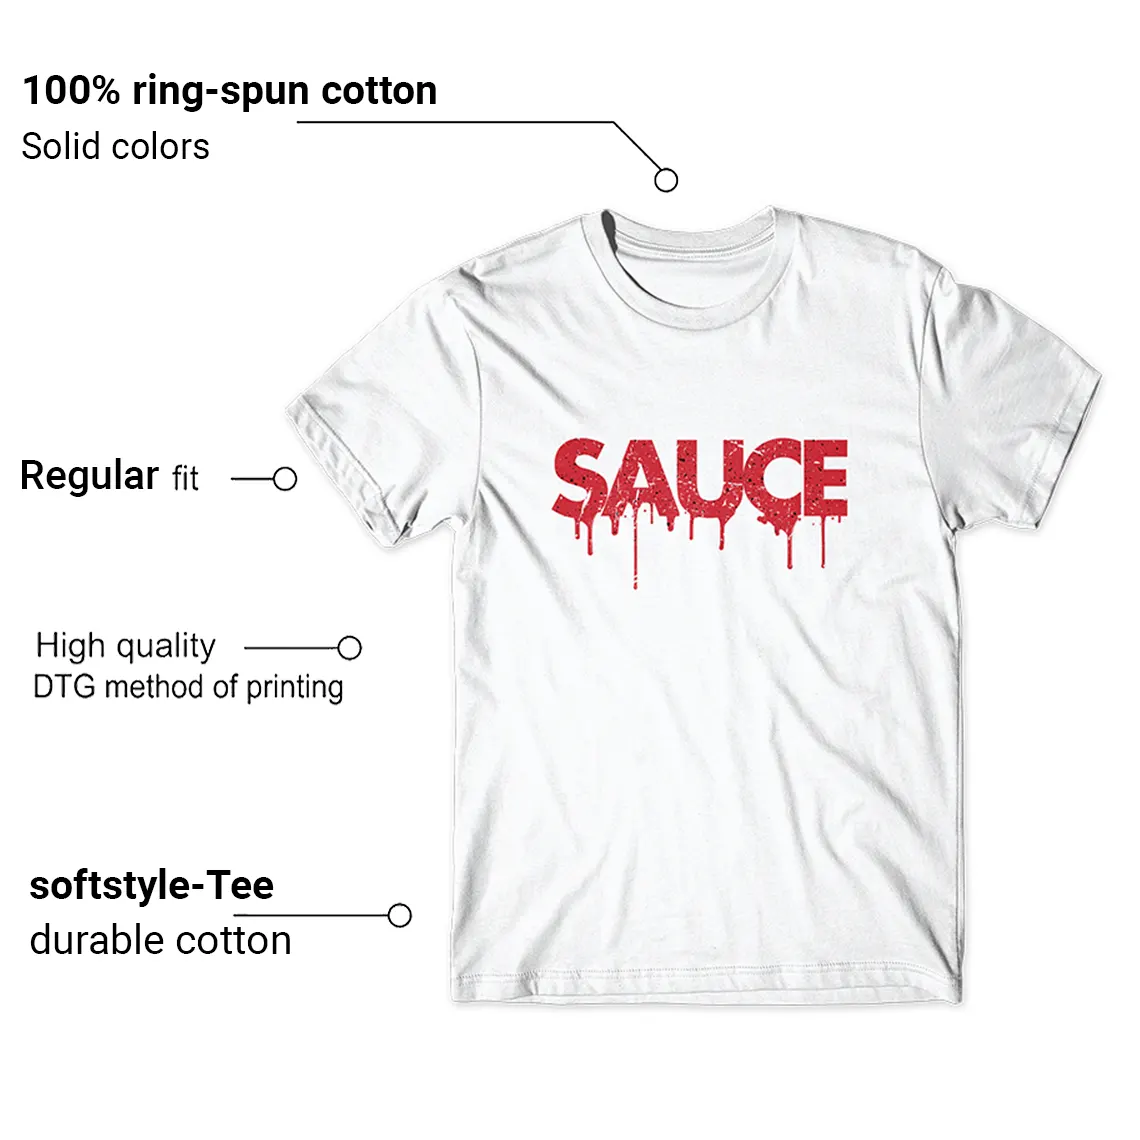 Red Cement Jordan 4 T-shirt Dripping Sauce Graphic Features